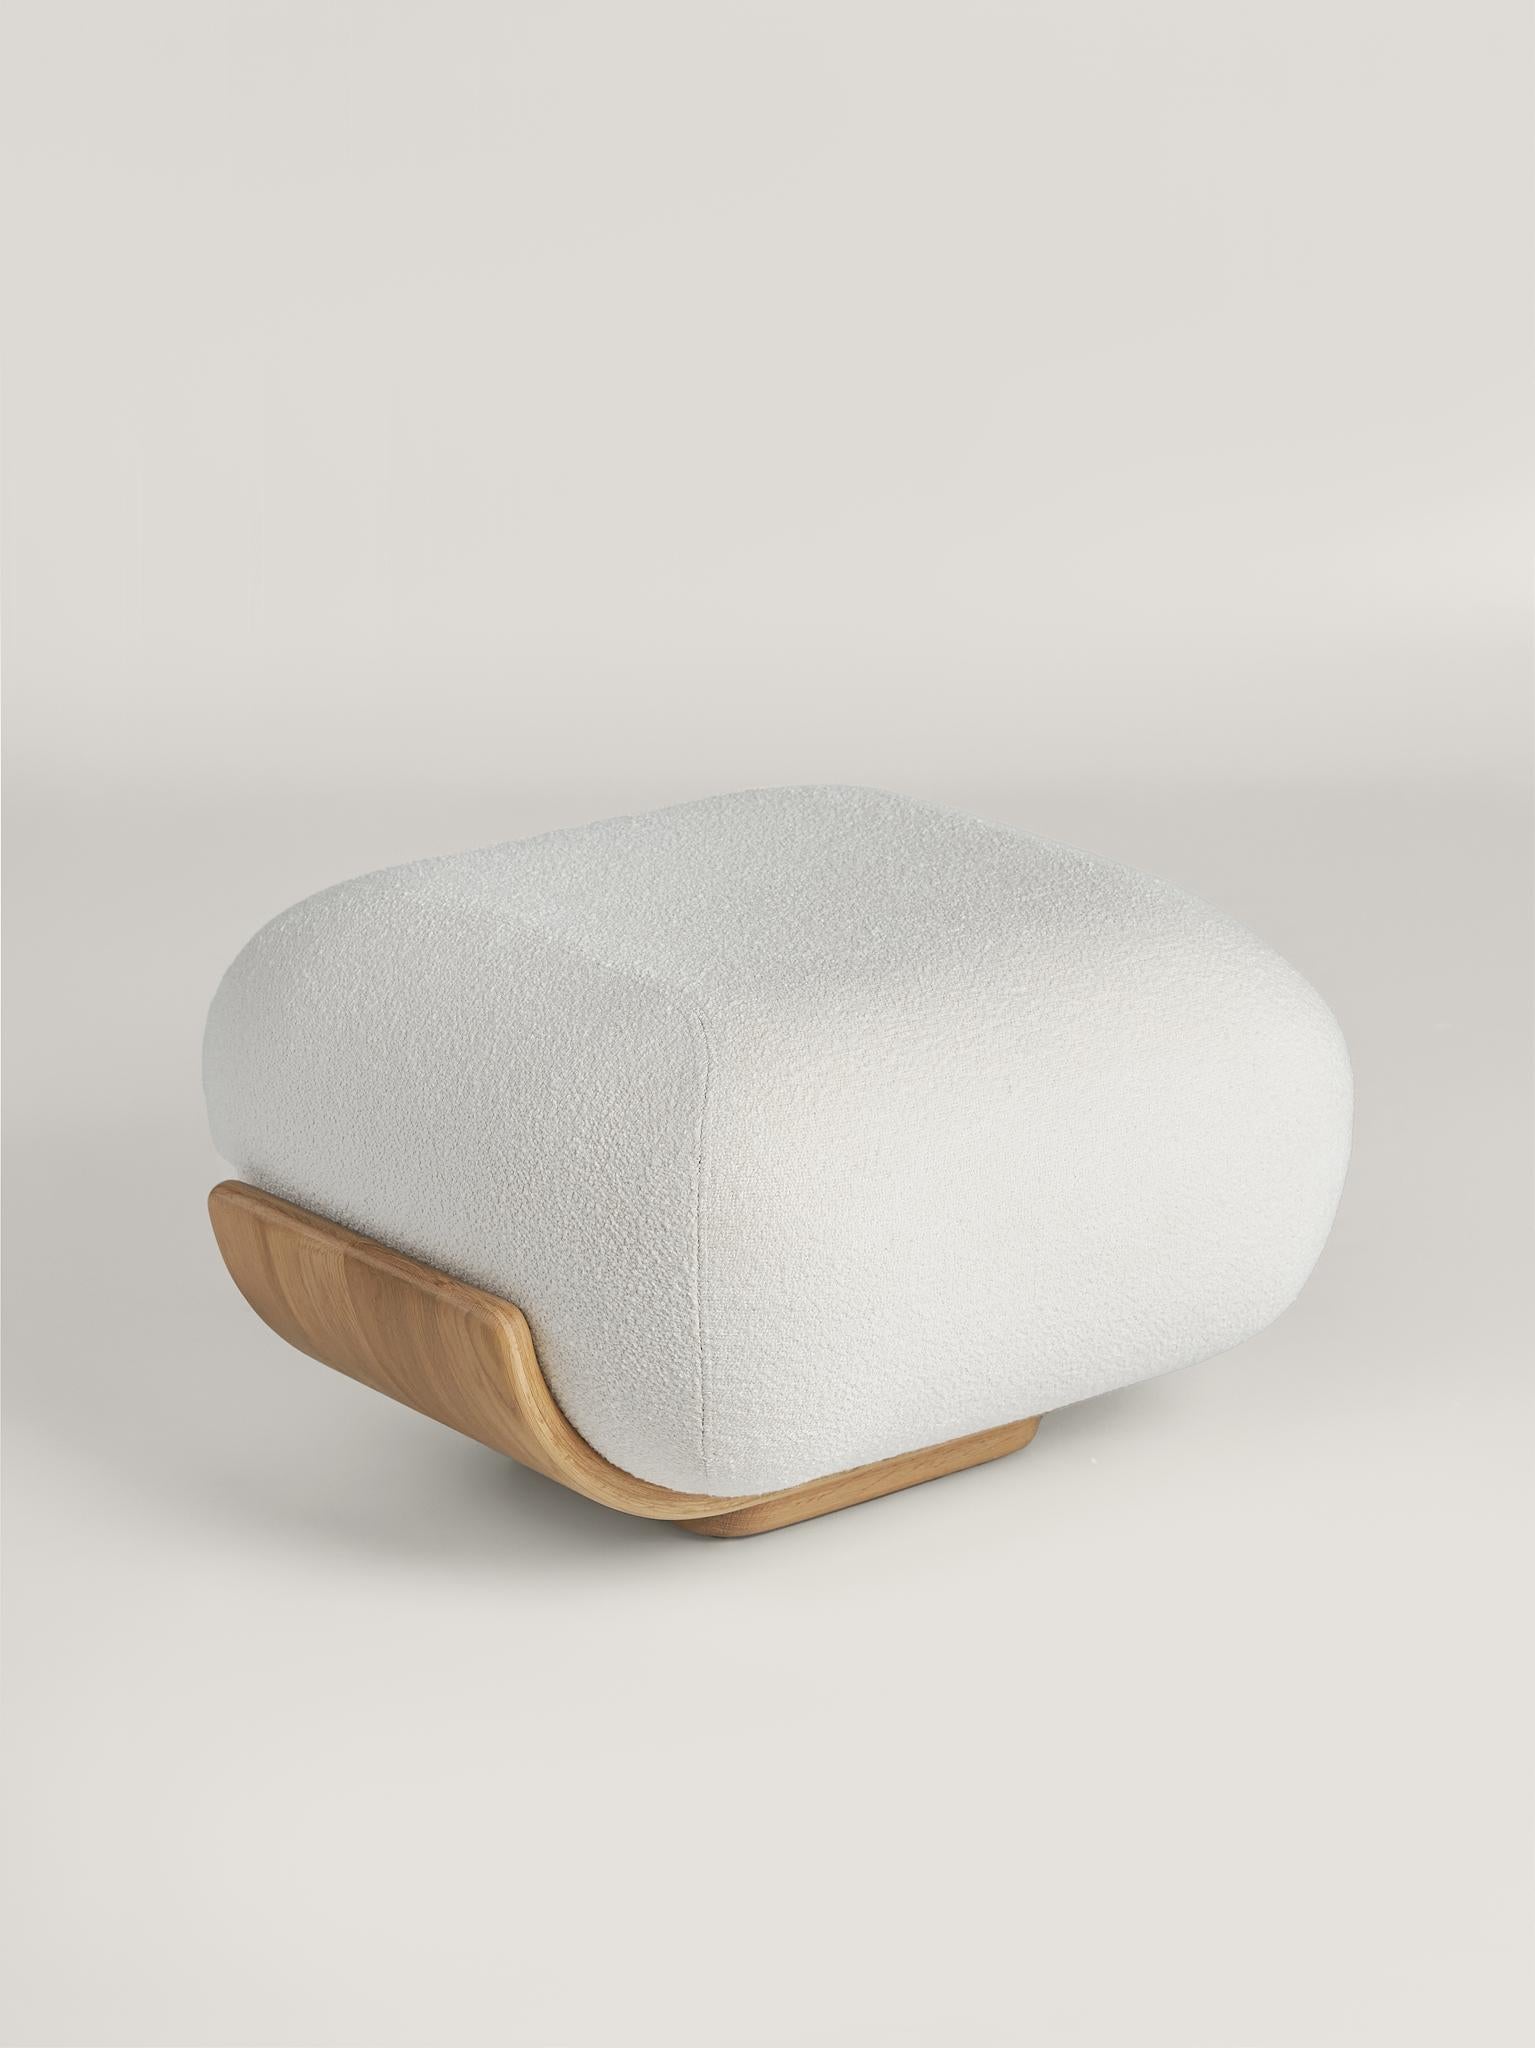 The Cannoli ottoman is a versatile and stylish addition to any living space. Its design is similar to that of the sofa and lounge chair, with a bent oak frame that encases the cushioned top.
 
The Cannoli ottoman's unique design and functionality